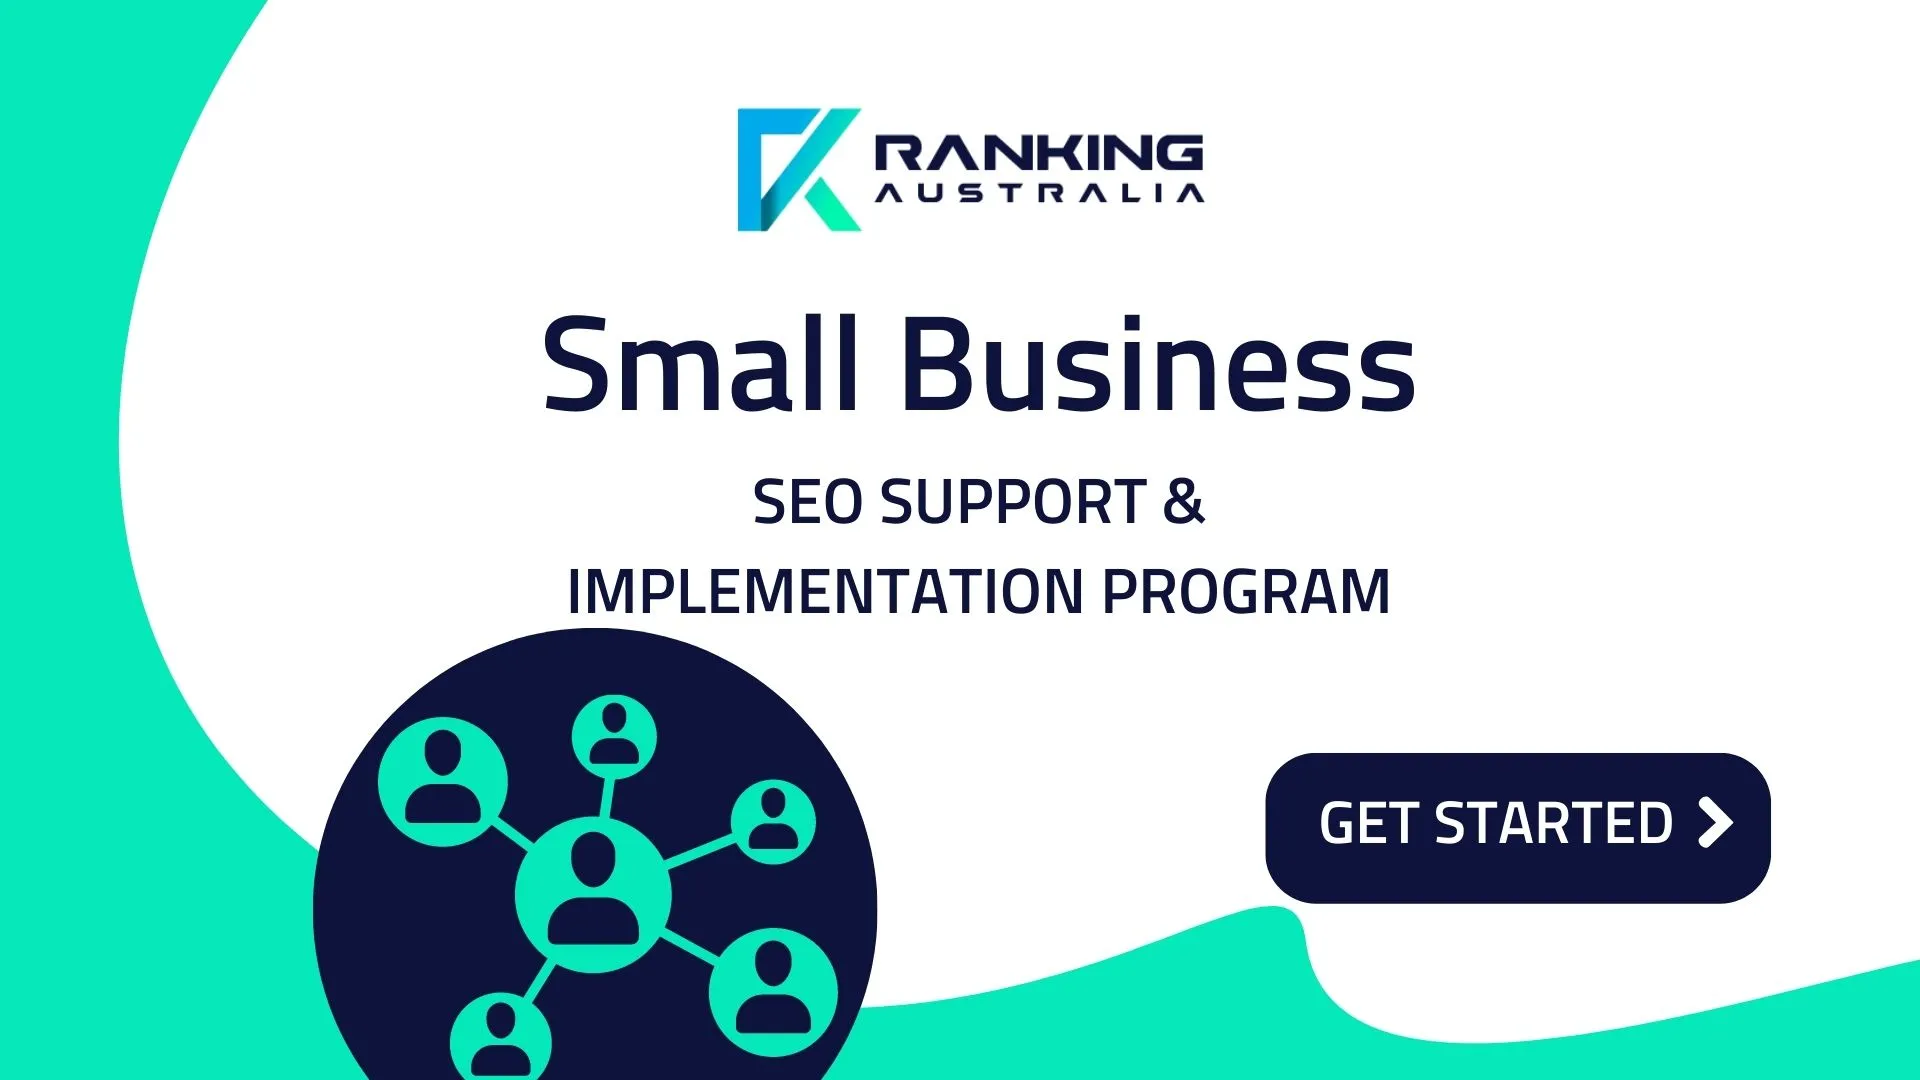 Chiropractor SEO Services Australia - Small Business Support Programs 